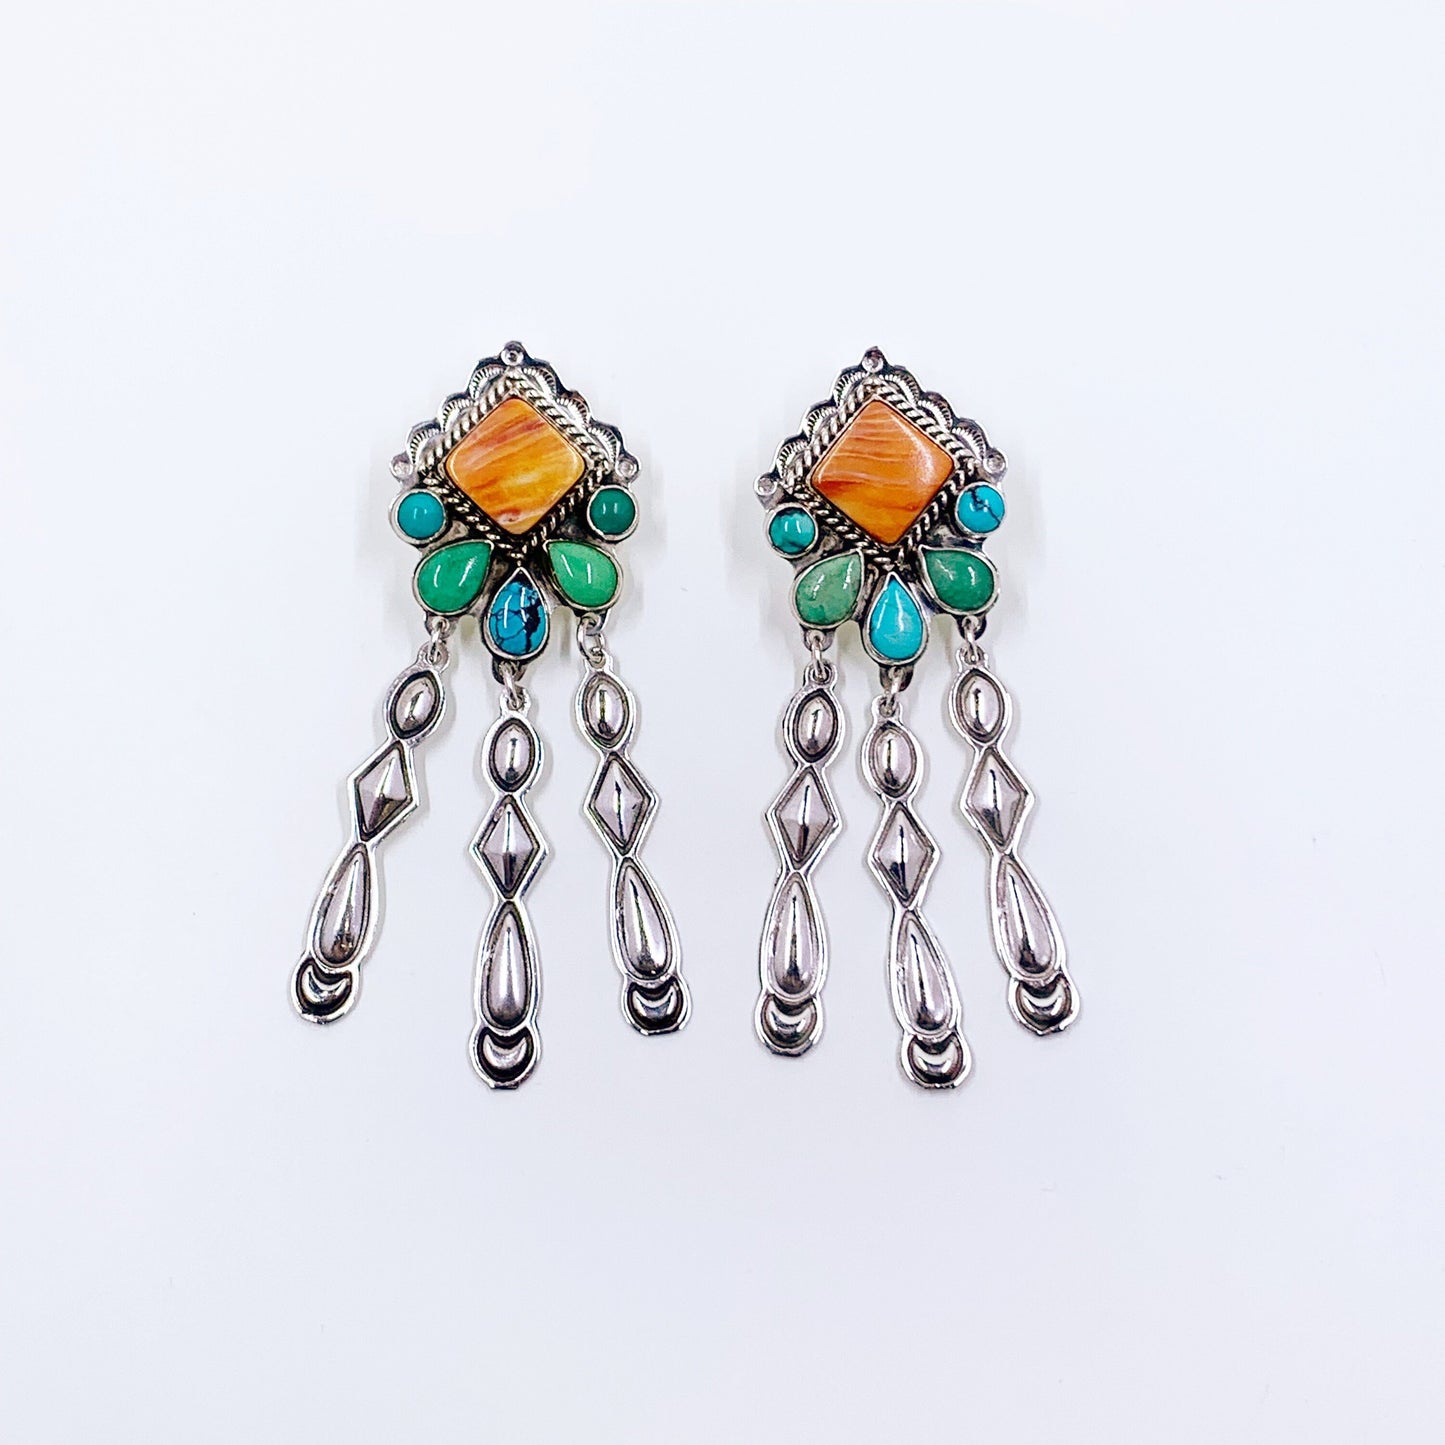 Estate Sterling Navajo Spiny Oyster and Turquoise Drop Earrings | Donald Douglas Navajo Multi-Stone Dangle Earrings